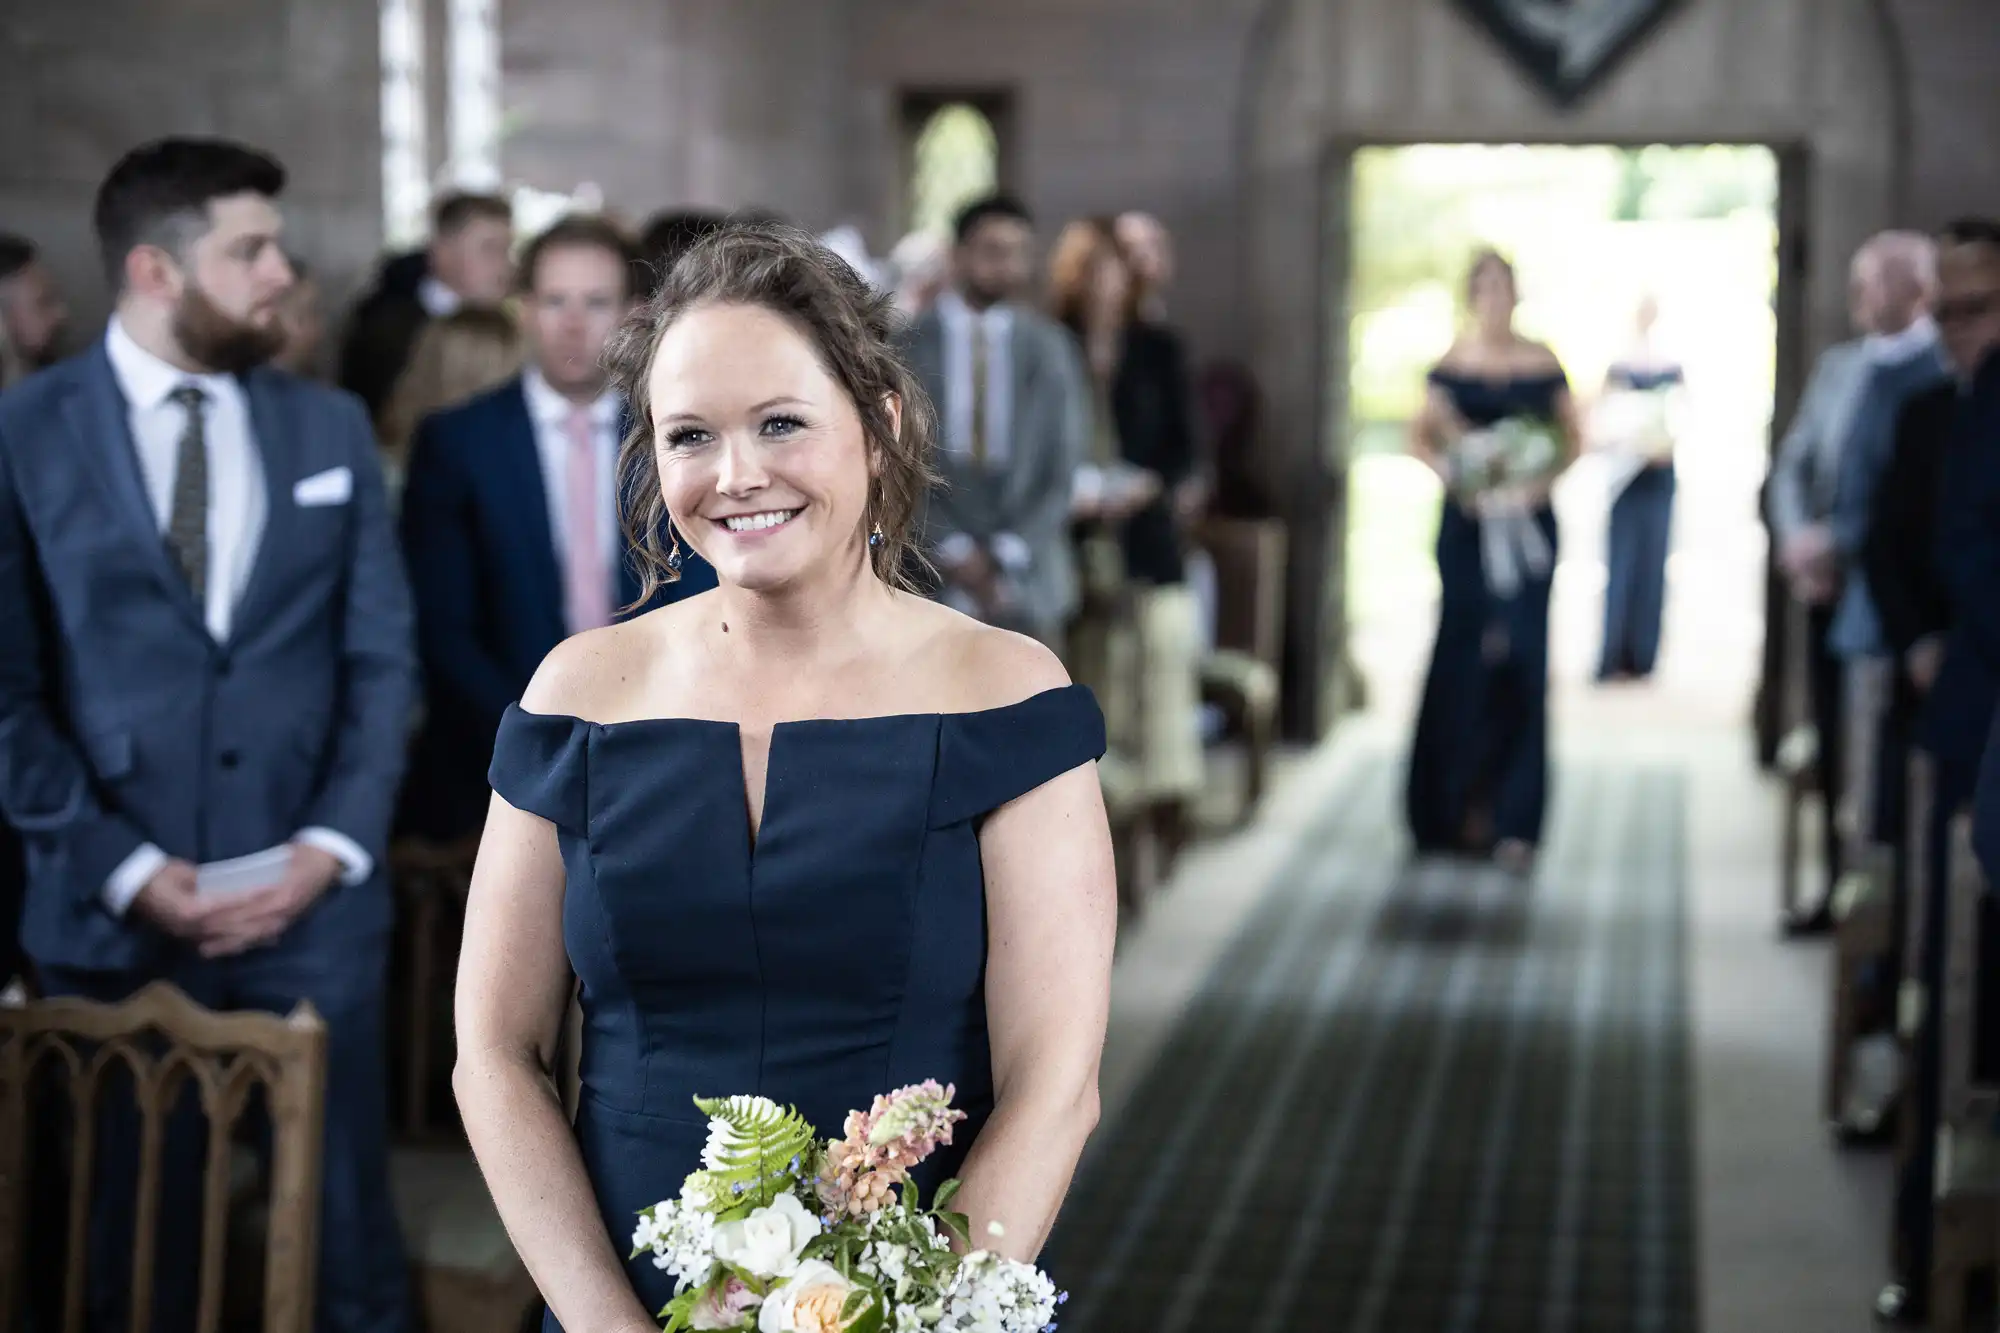 A woman in a navy off-shoulder dress smiling with a bouquet, standing in a church aisle with guests in the background.